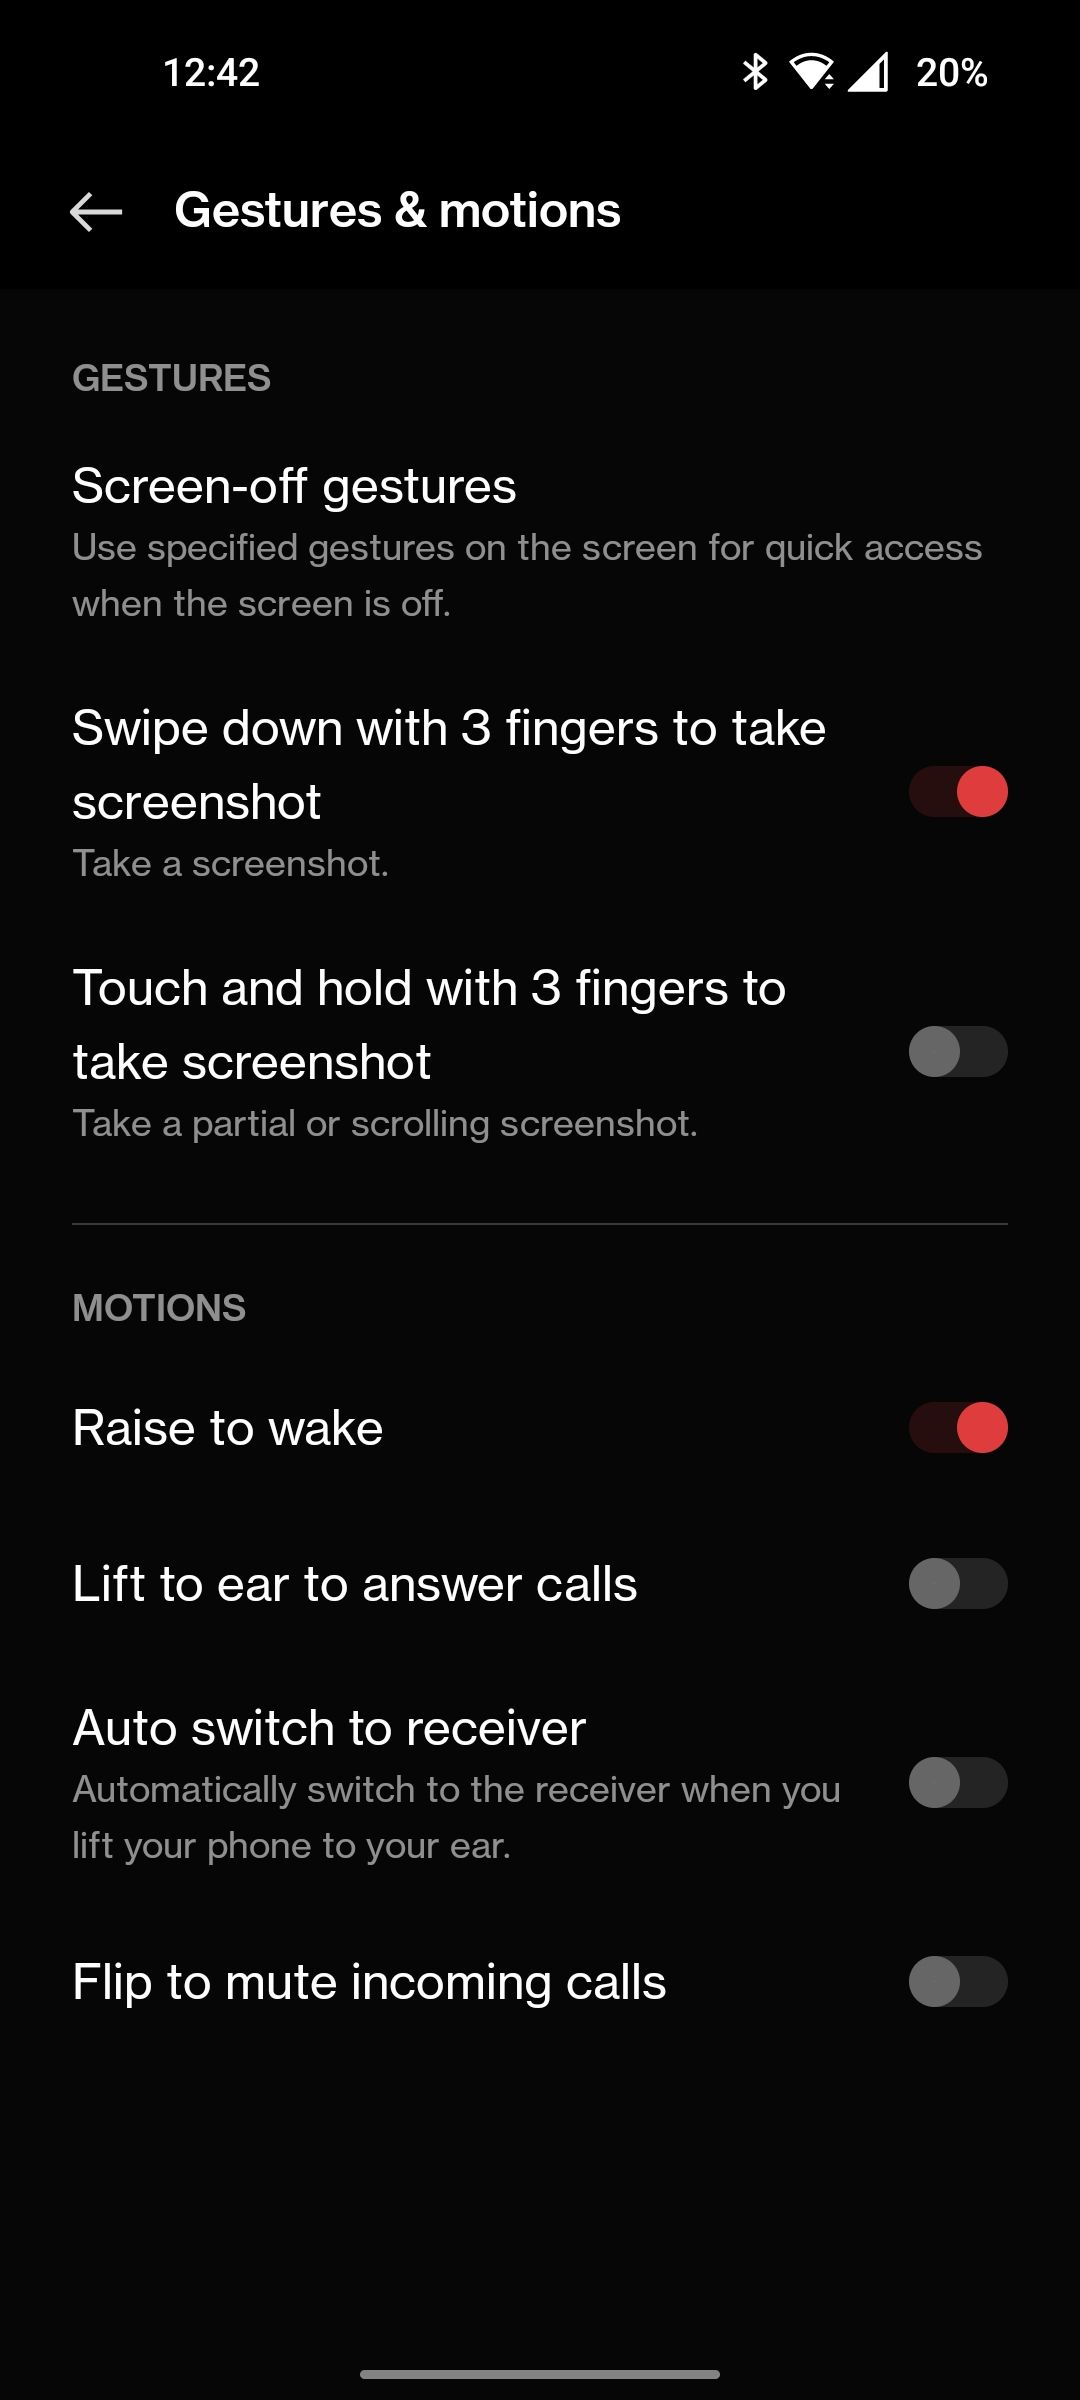 OnePlus gestures and motion options